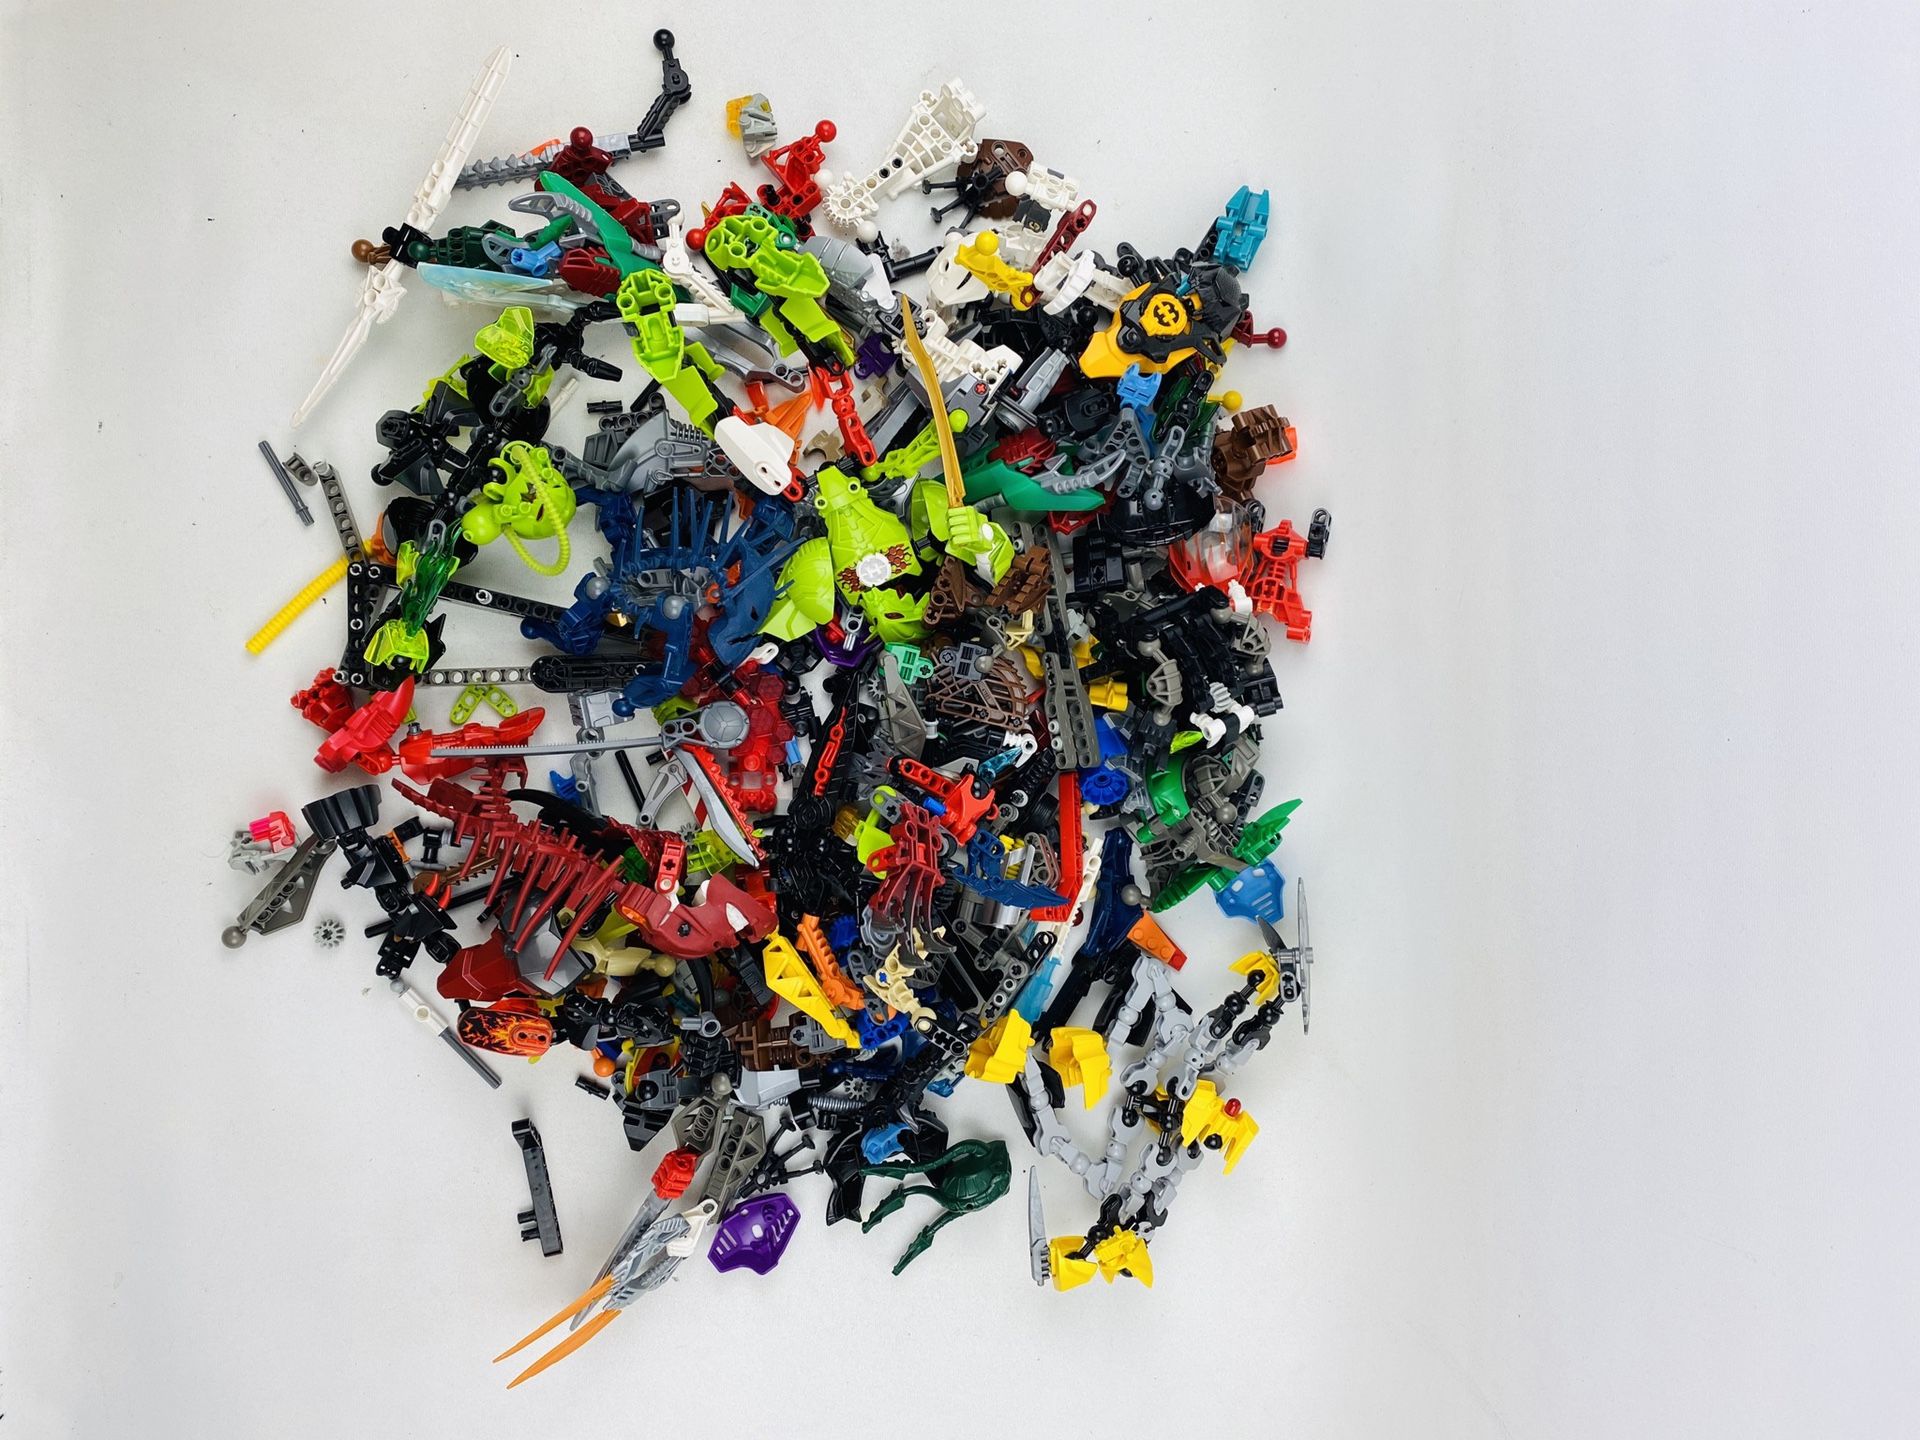 LEGO Bionicle Hero Factory Parts Lot Over 3lbs